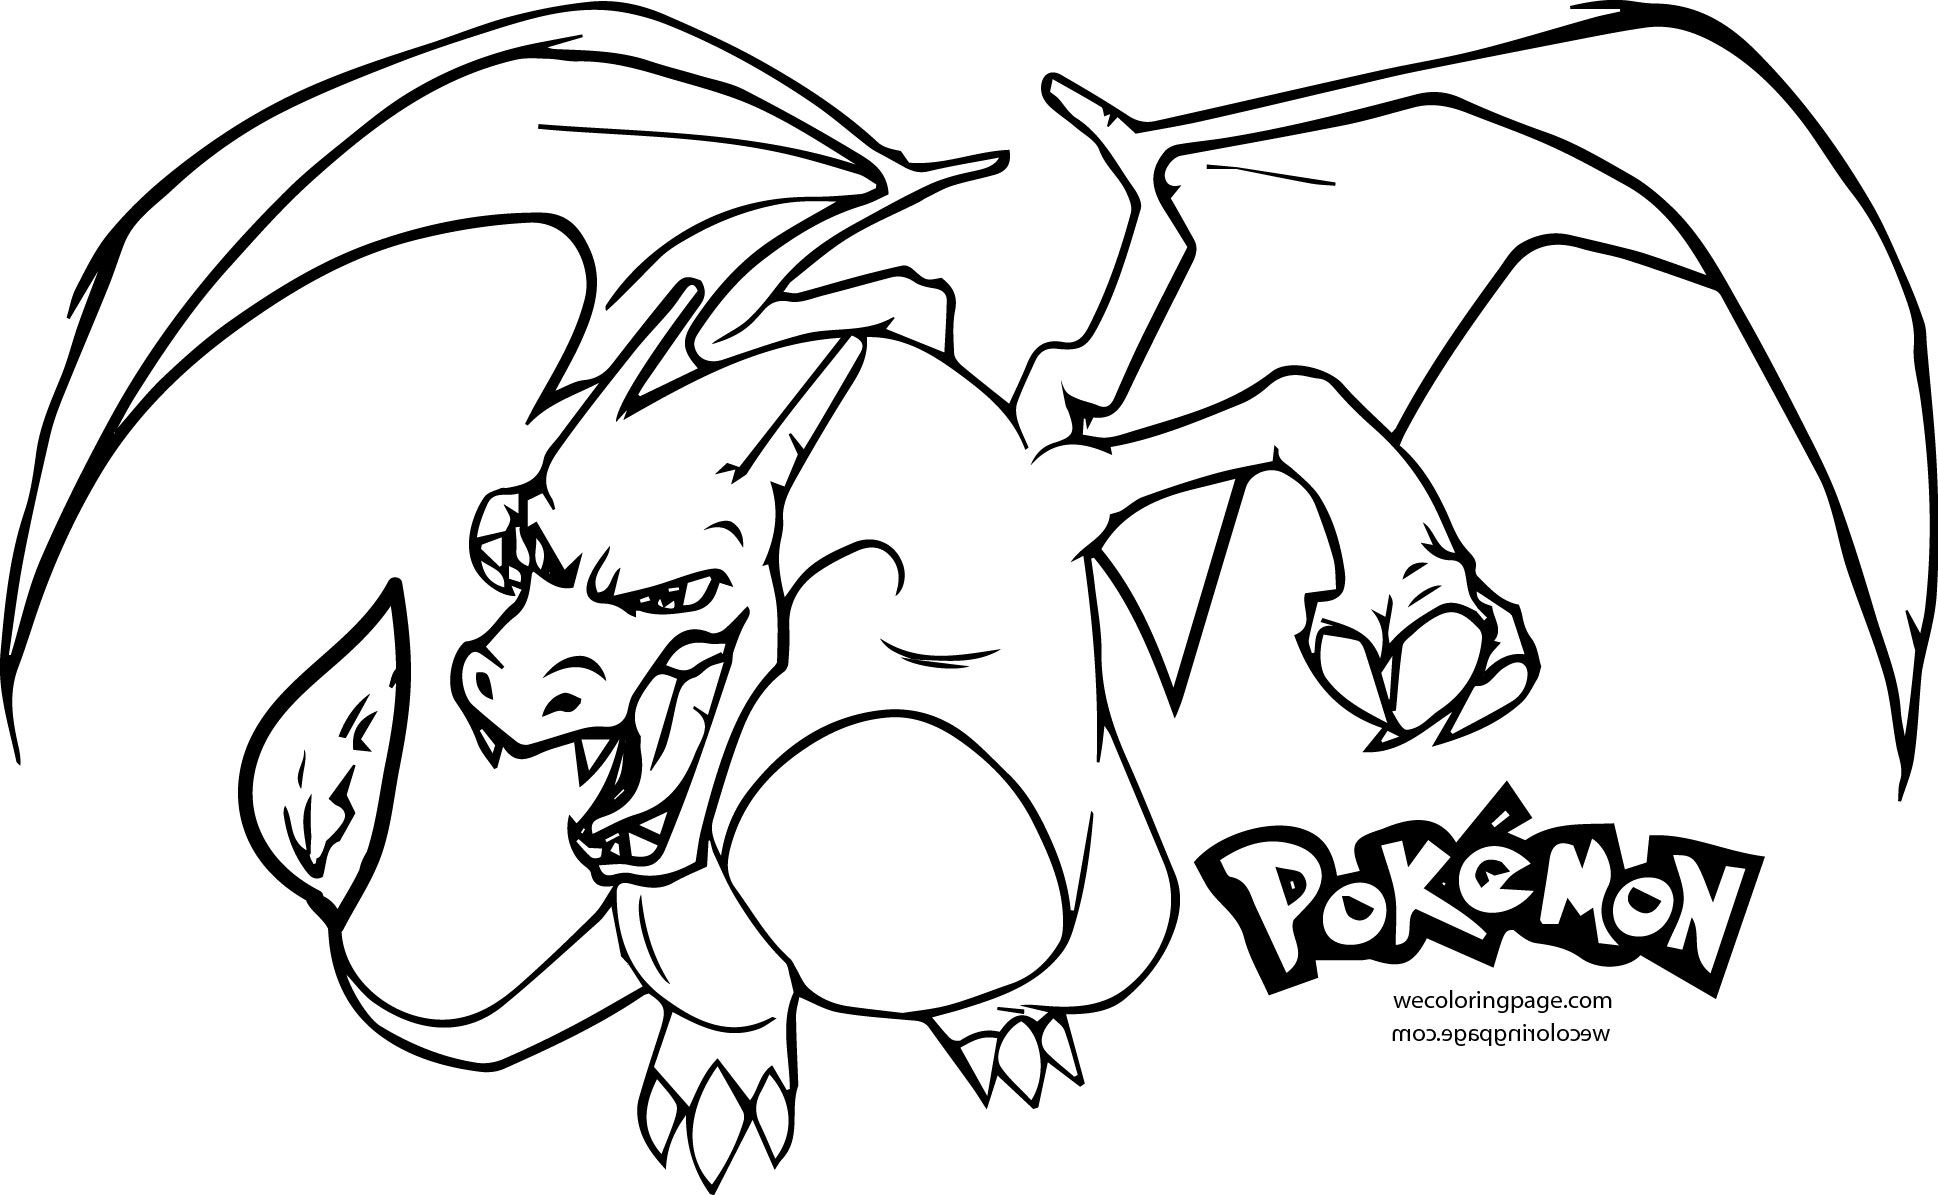 Charizard Coloring Page at GetColorings.com | Free printable colorings